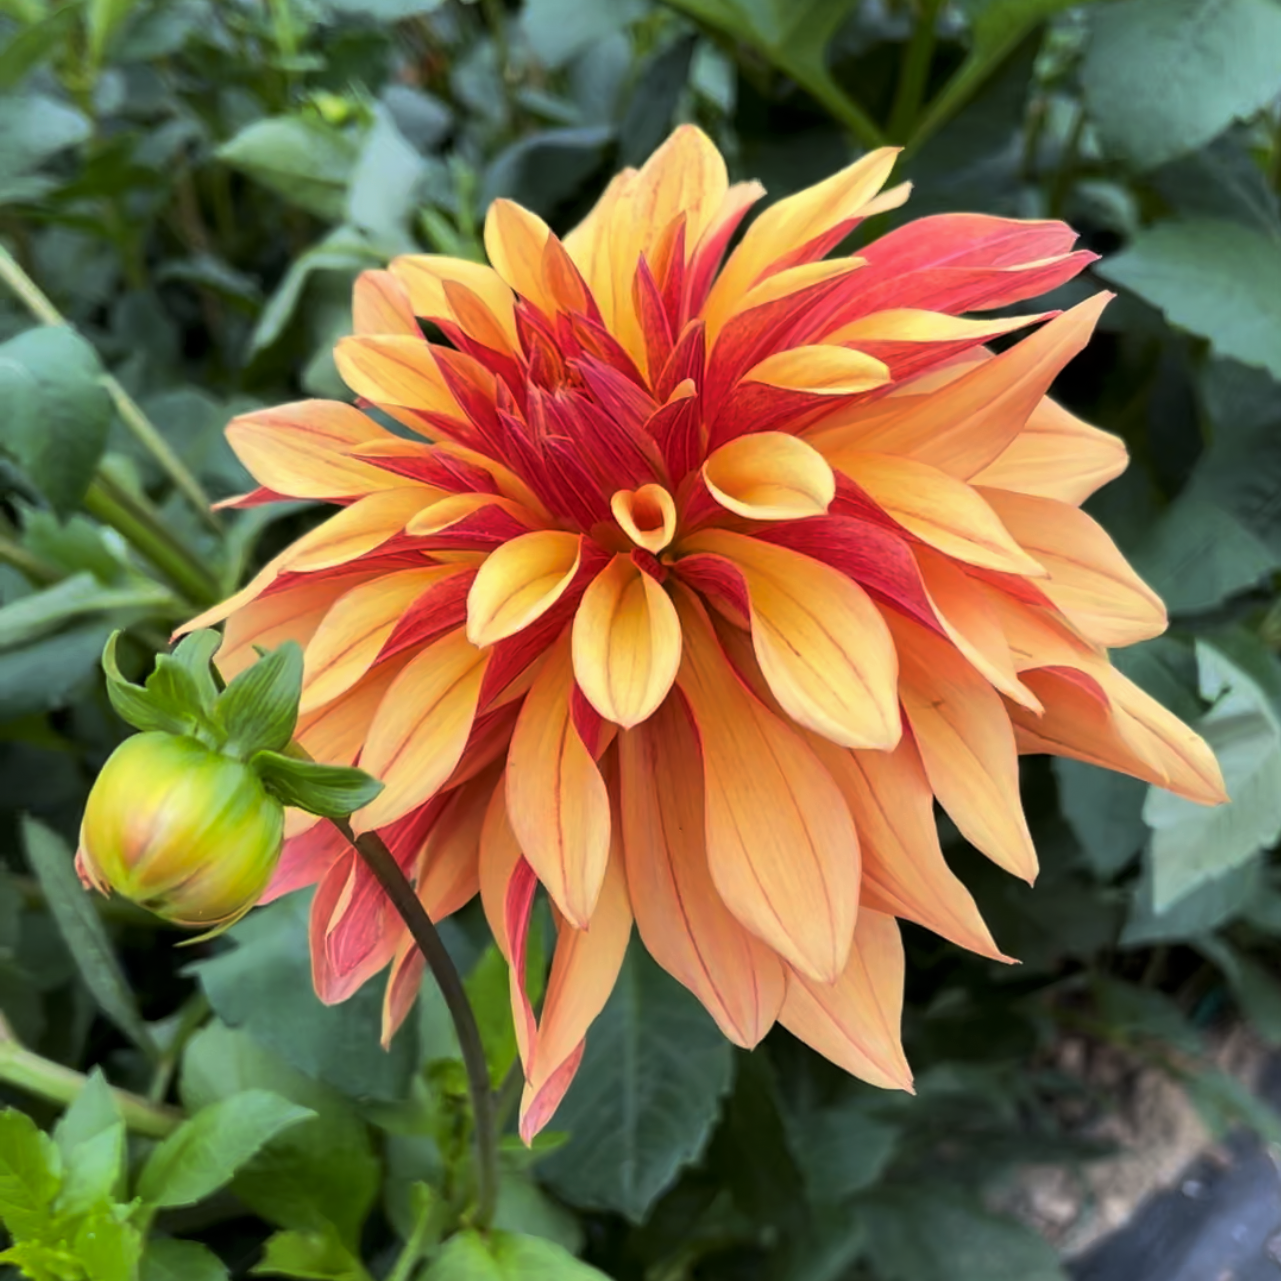 A newer variety and already everyone's favorite, French Cancan dahlia just glows in your garden with its honey orange petals with a burnished copper reverse. Twisty, shaggy and effortless bloom is early and very prolific. Buy dahlia tubers online www.lilysgardenstore.com